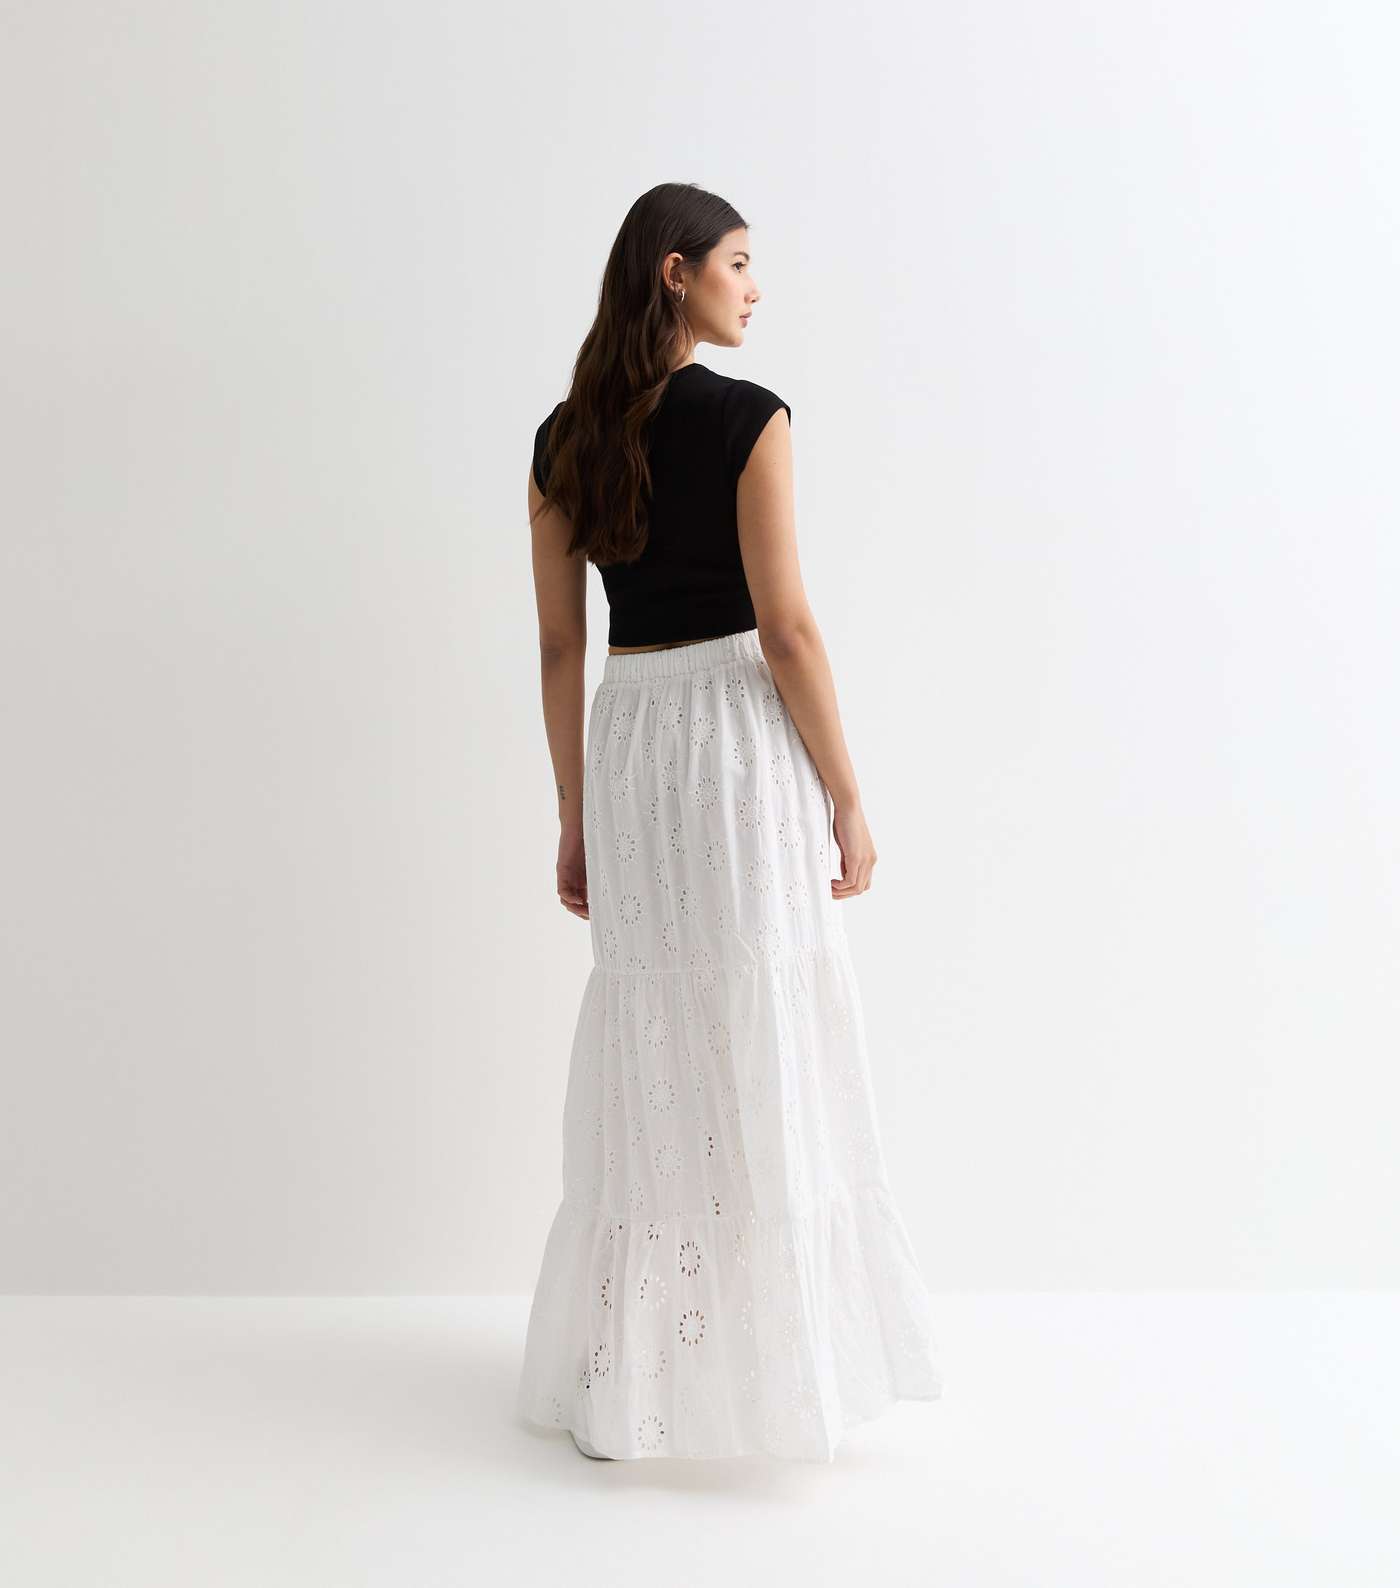 Gini London White Tiered Lace Embroidered Maxi Skirt Image 4